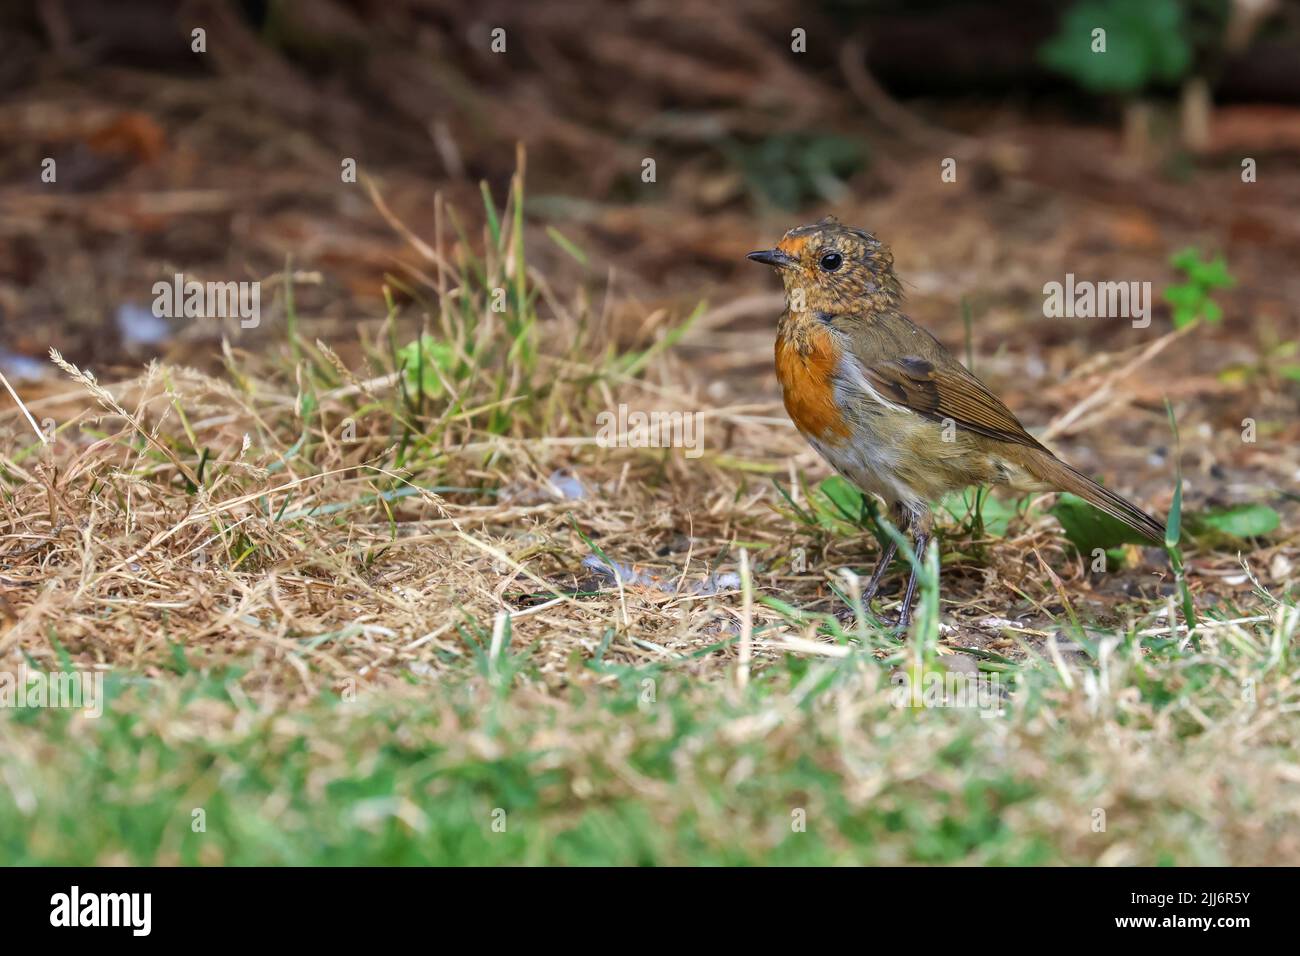 Young robin bird 'Erithacus rubecula' standing on dry grass, juvenile feathers changing color to orange red. Side profile. Dublin, Ireland Stock Photo